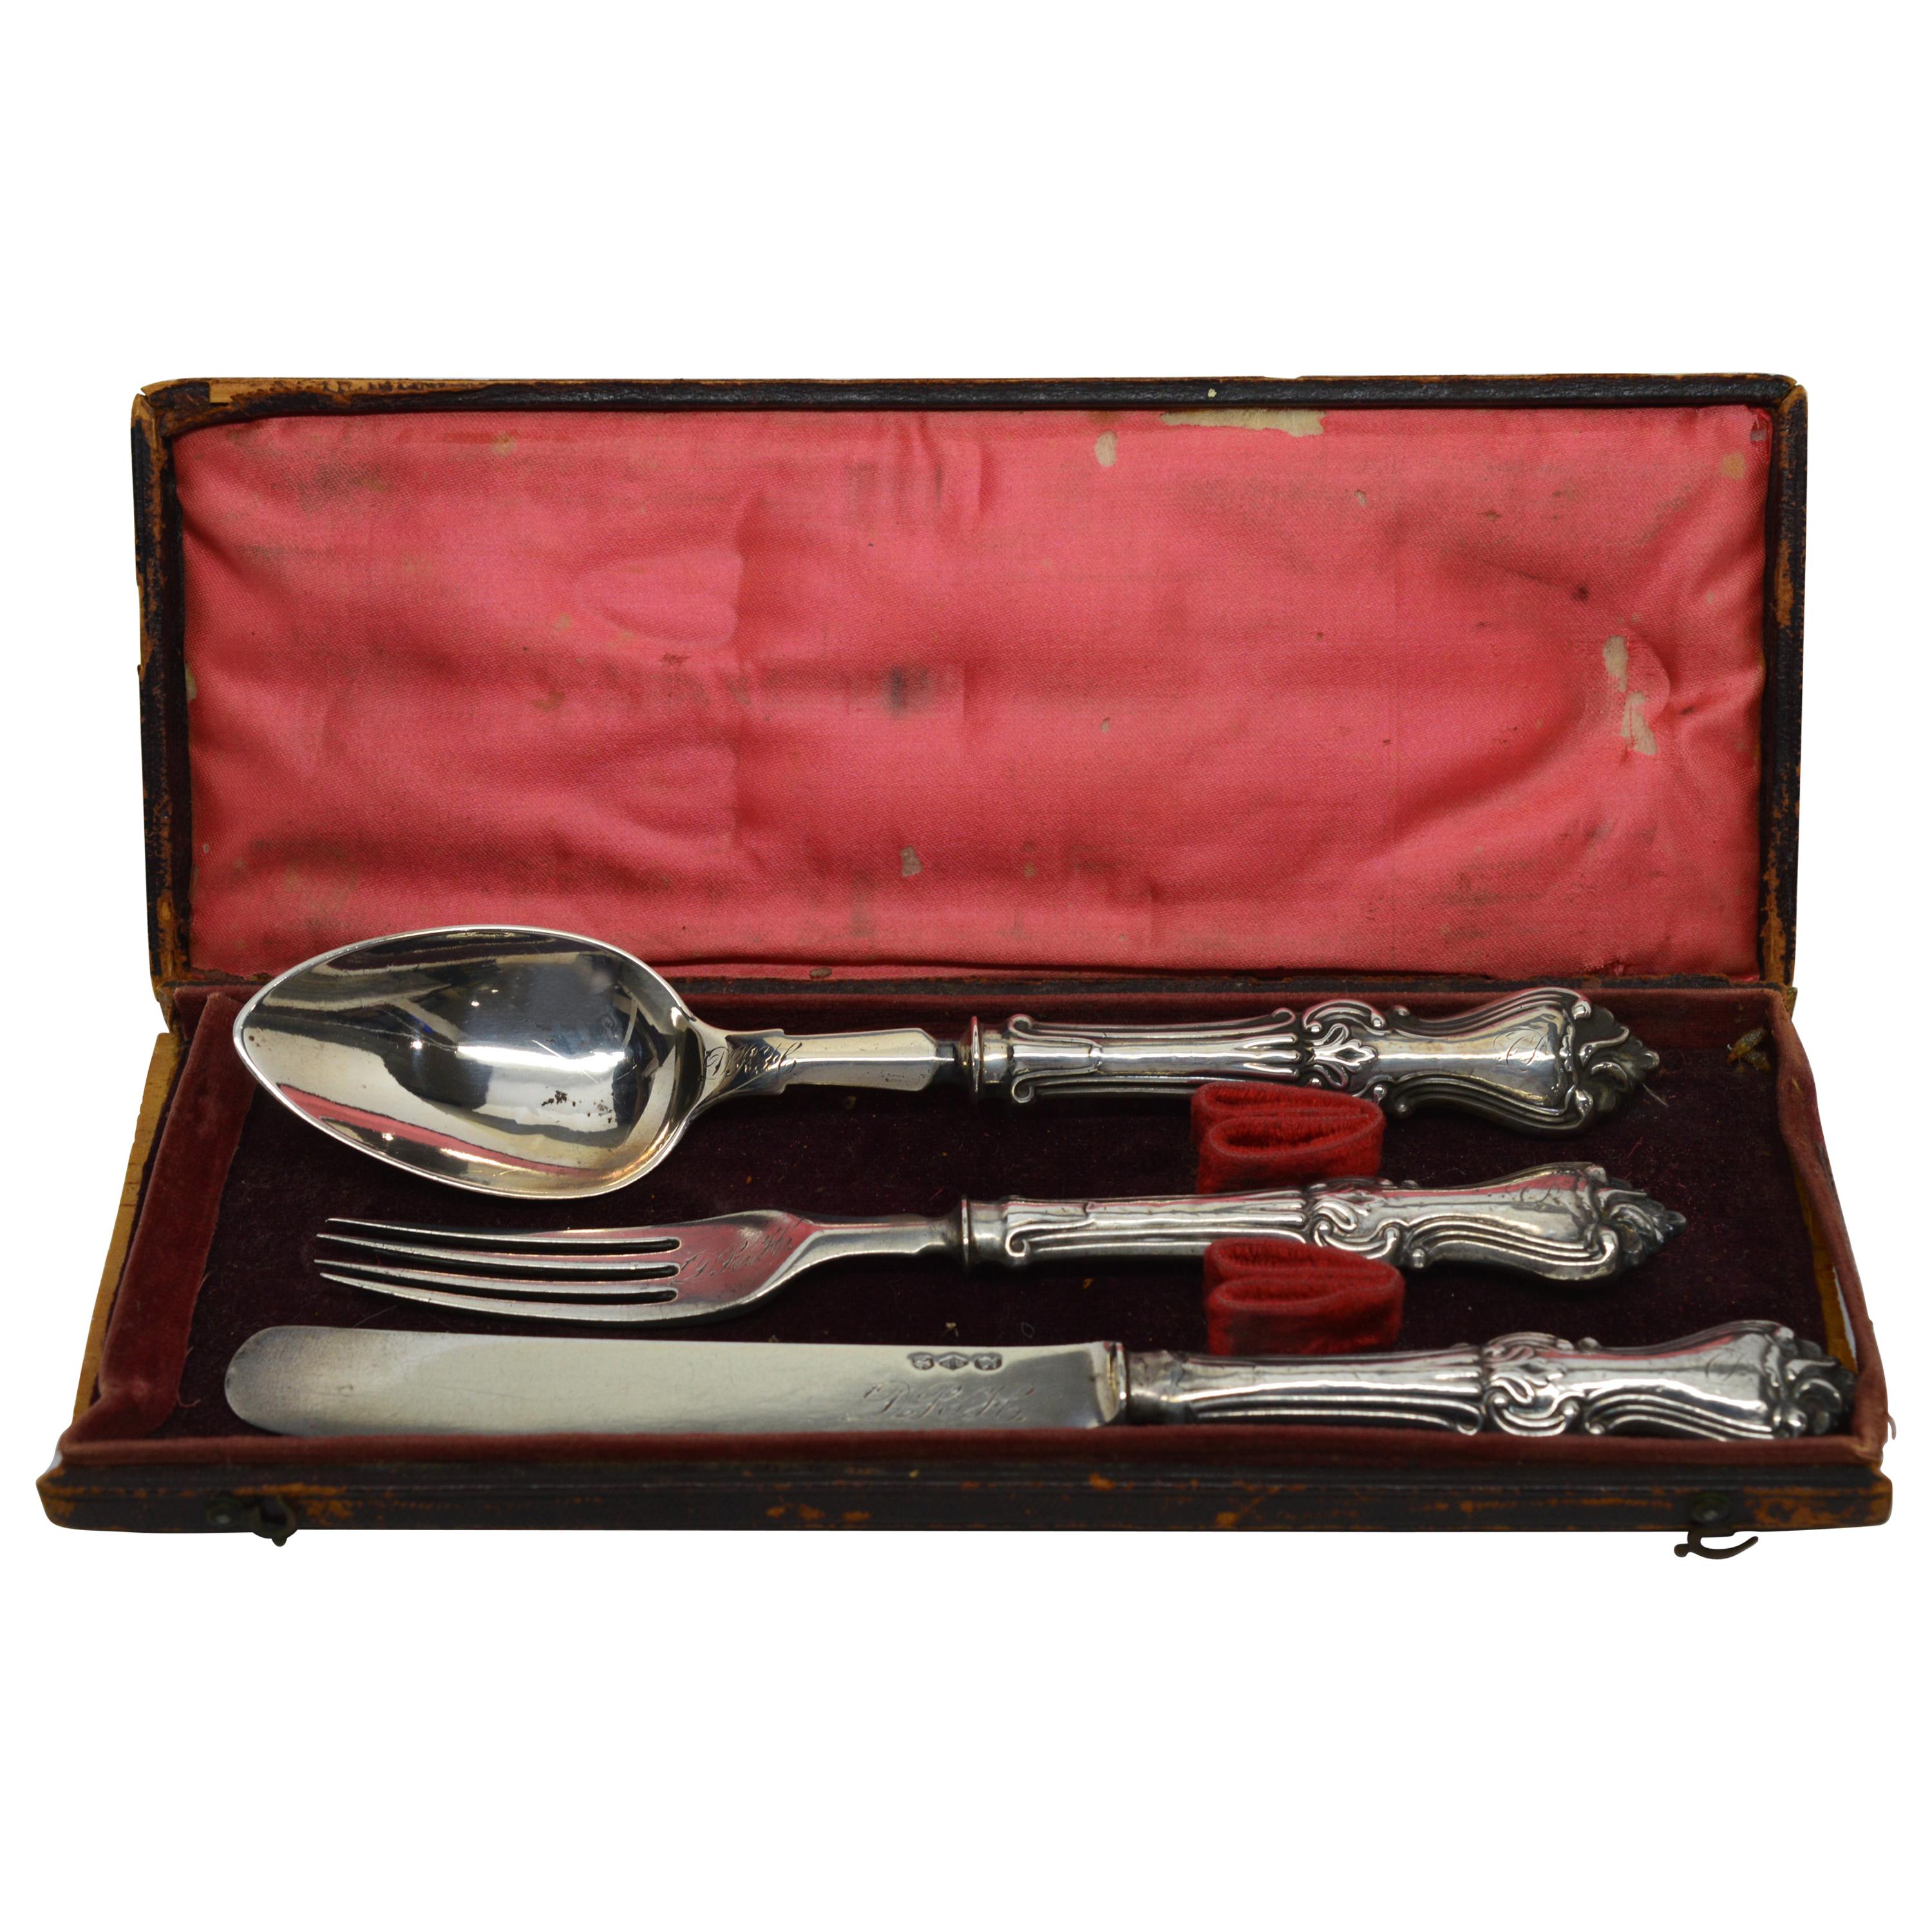 Antique American Personal Travel Sterling Silver Flatware Set